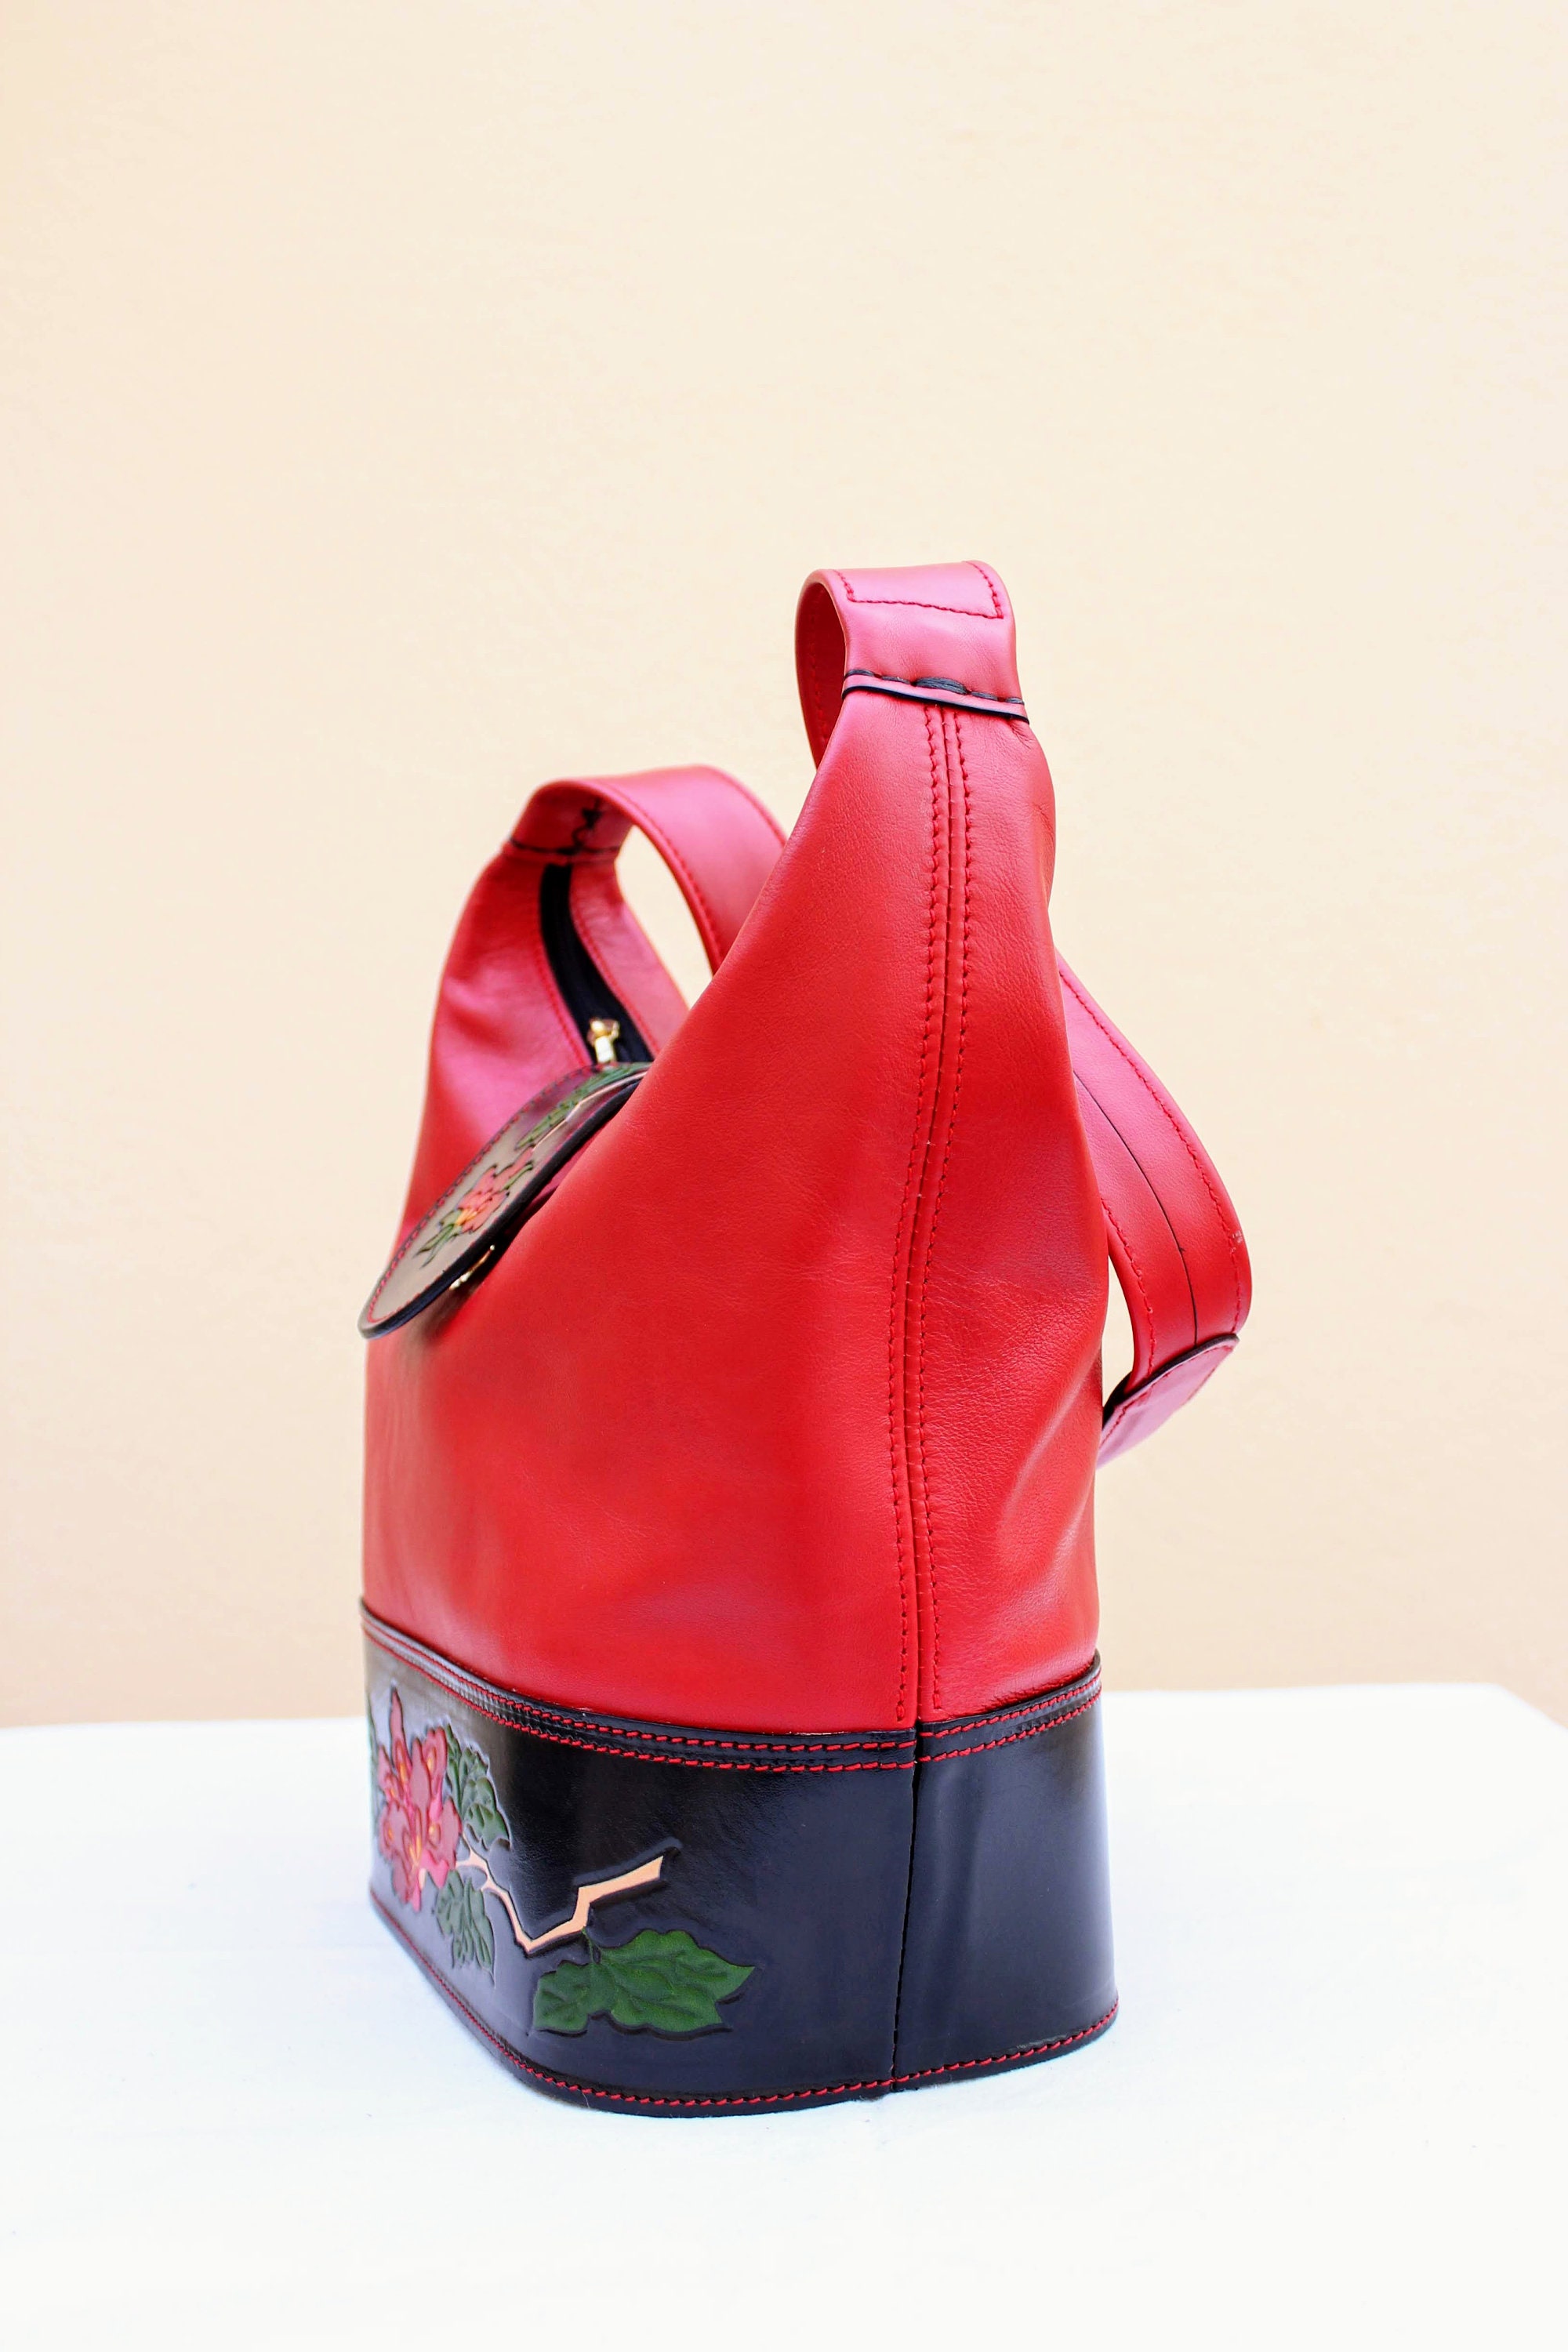 Red Leather Hobo Bag Purse Women S Leather Purse Red Etsy